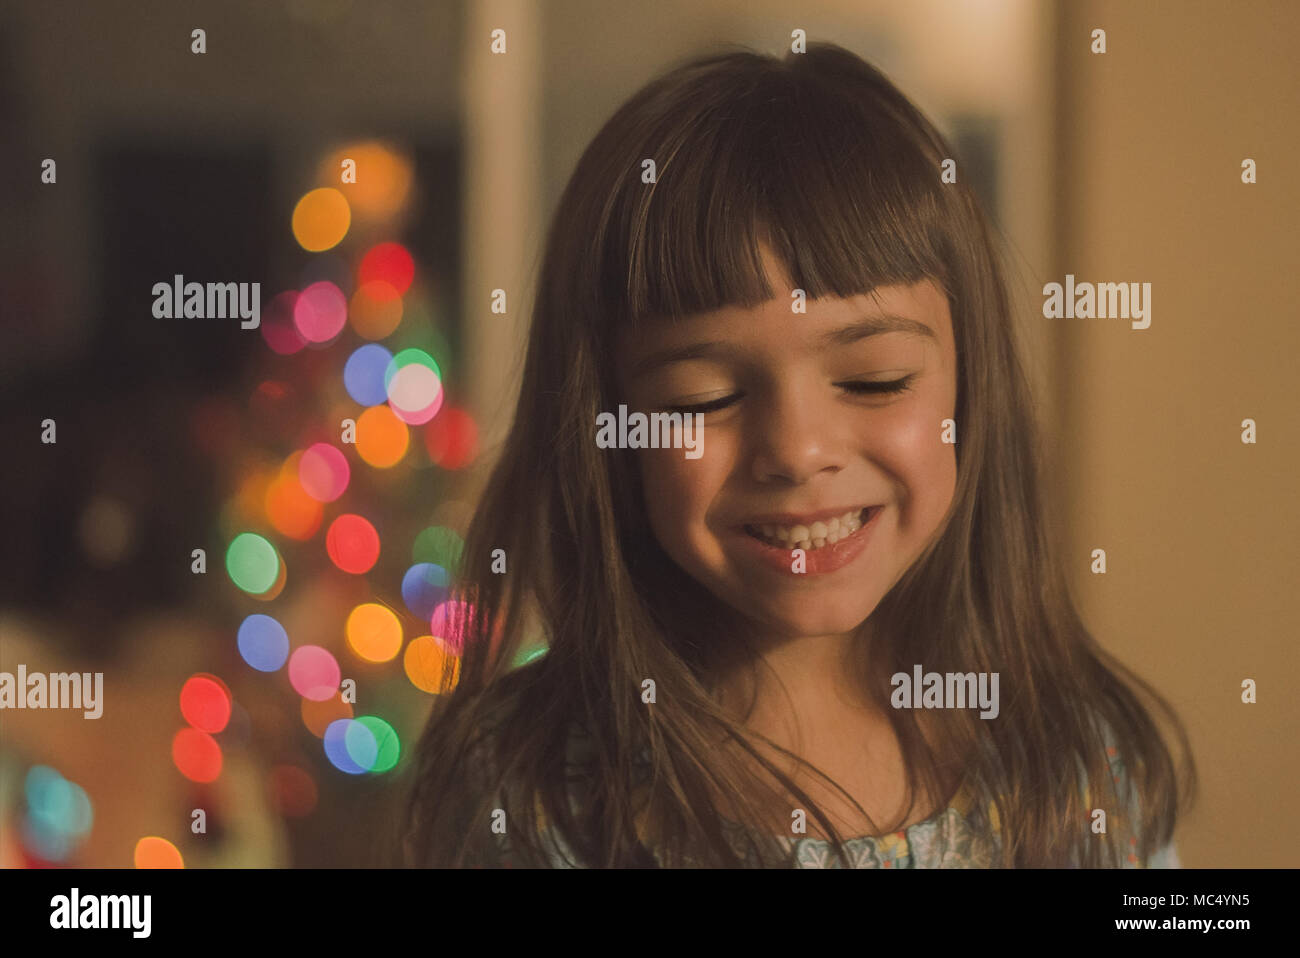 Cute Girl During Christmas Stock Photo